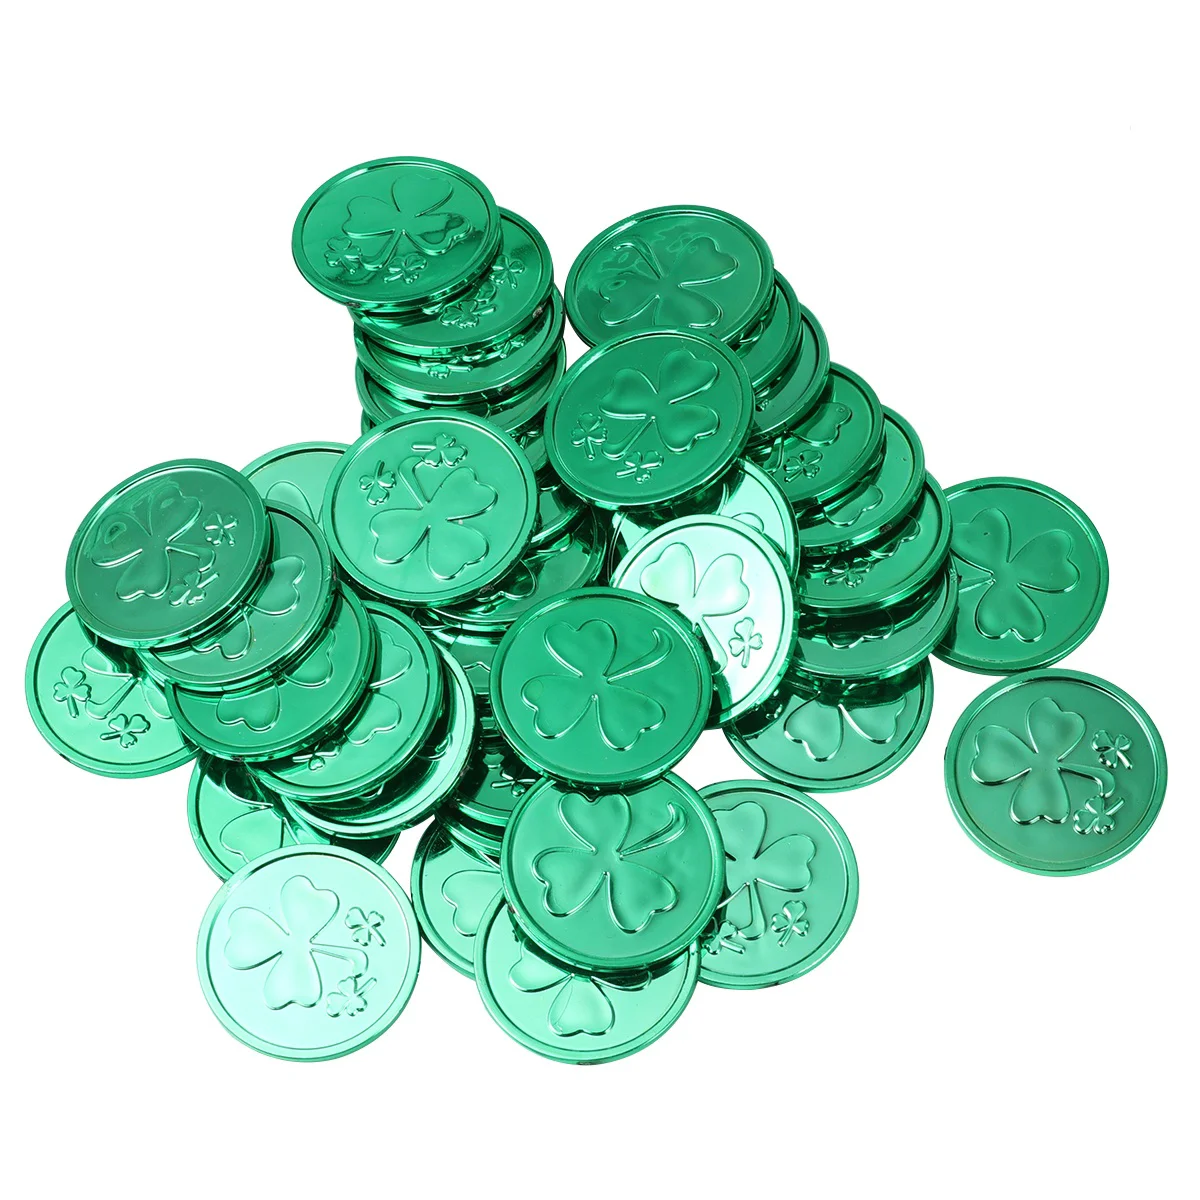 

Coins Toys Patrick Party Pirate Shamrock S Day Coin Supplies St Green Treasure Gold Decorations Favors Lucky Leprechaun Leaf